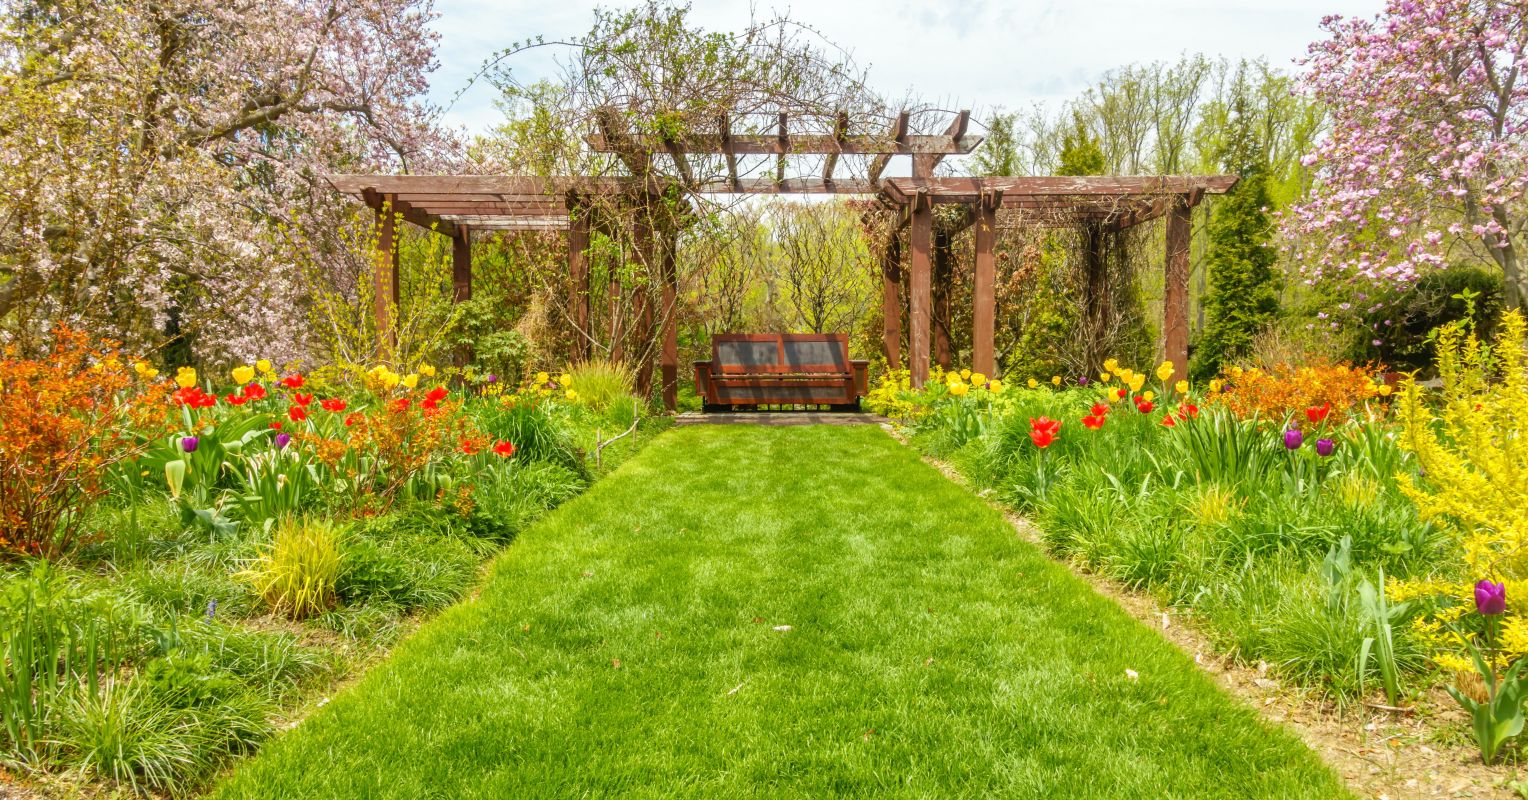 Why Are Gardens So Good for the Soul? | Psychology Today